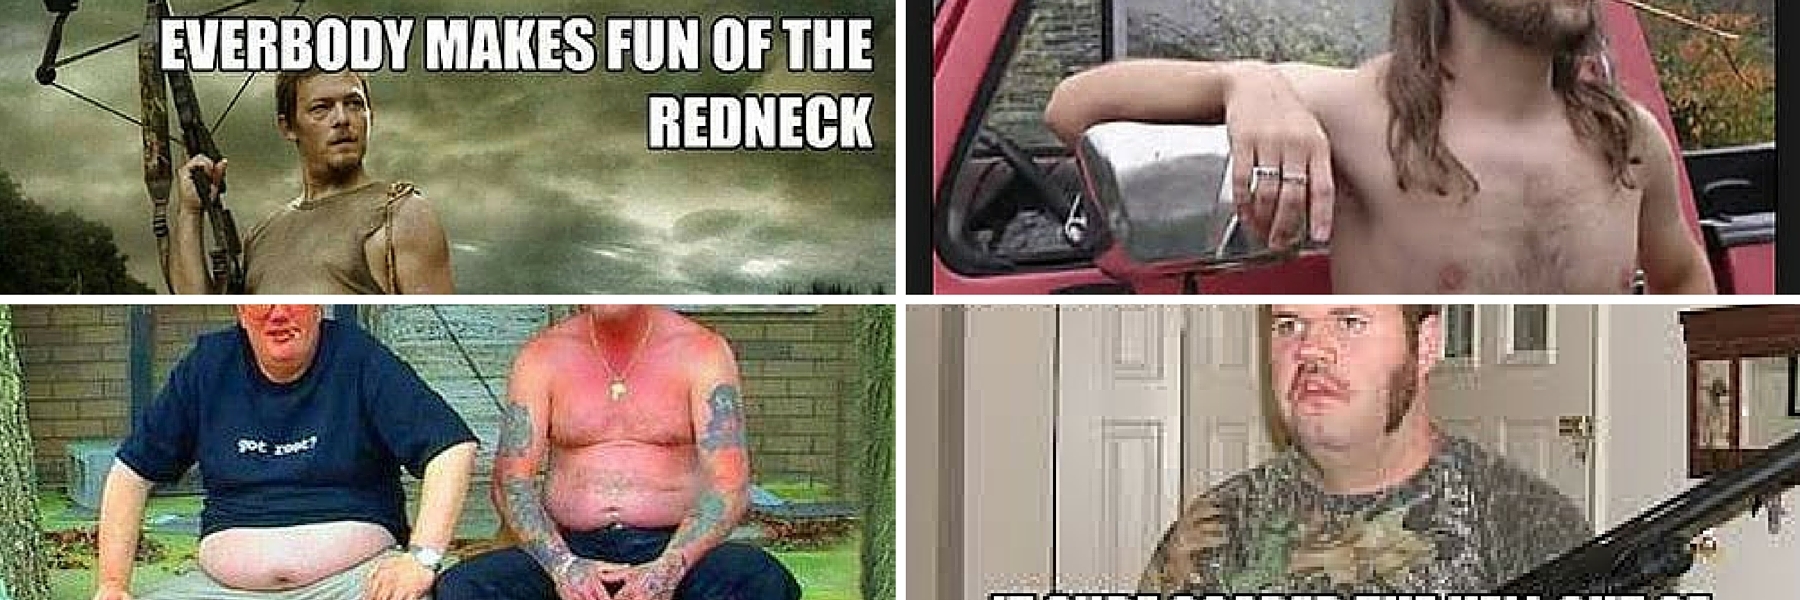 The best Redneck Memes collection. Check out the full article for the best Redneck funny memes collection online.